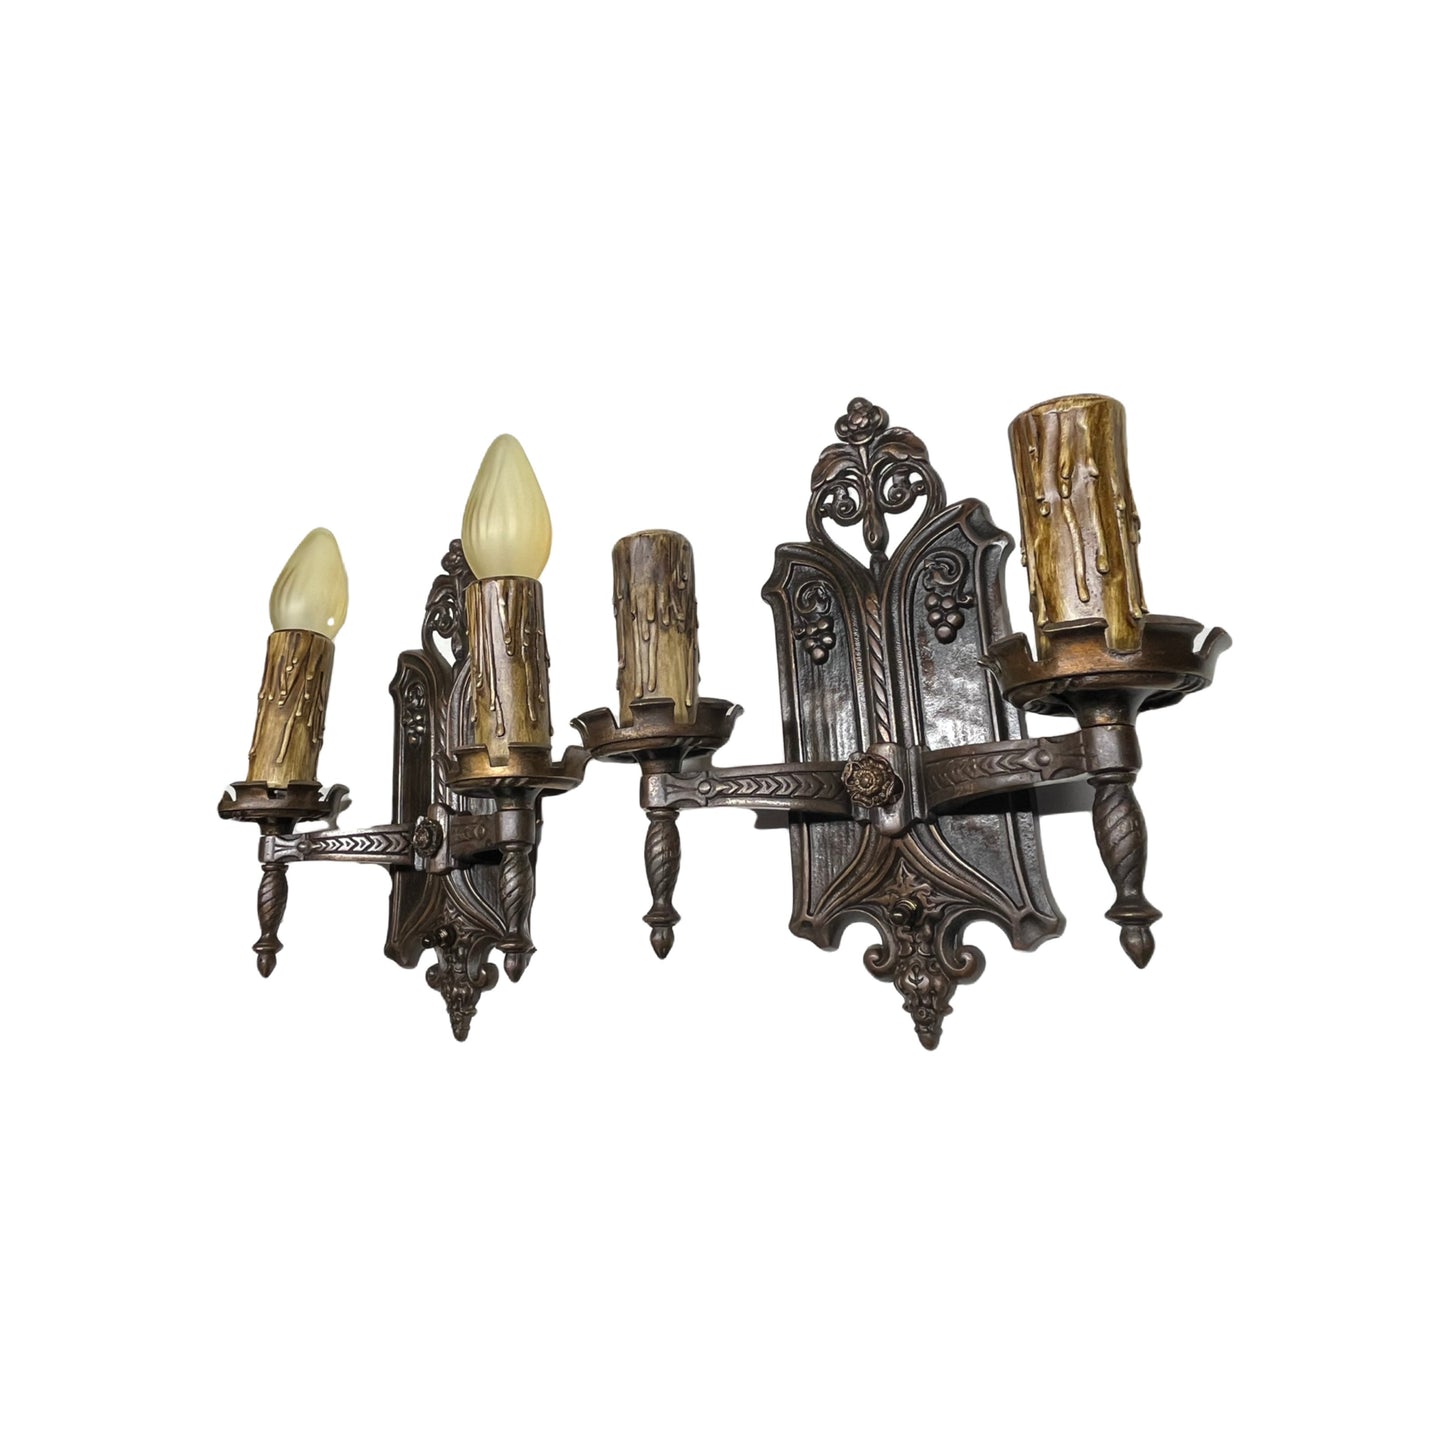 Tudor Style Cast Bronze Double Light Wall Sconces with Revived Original Finish #2379